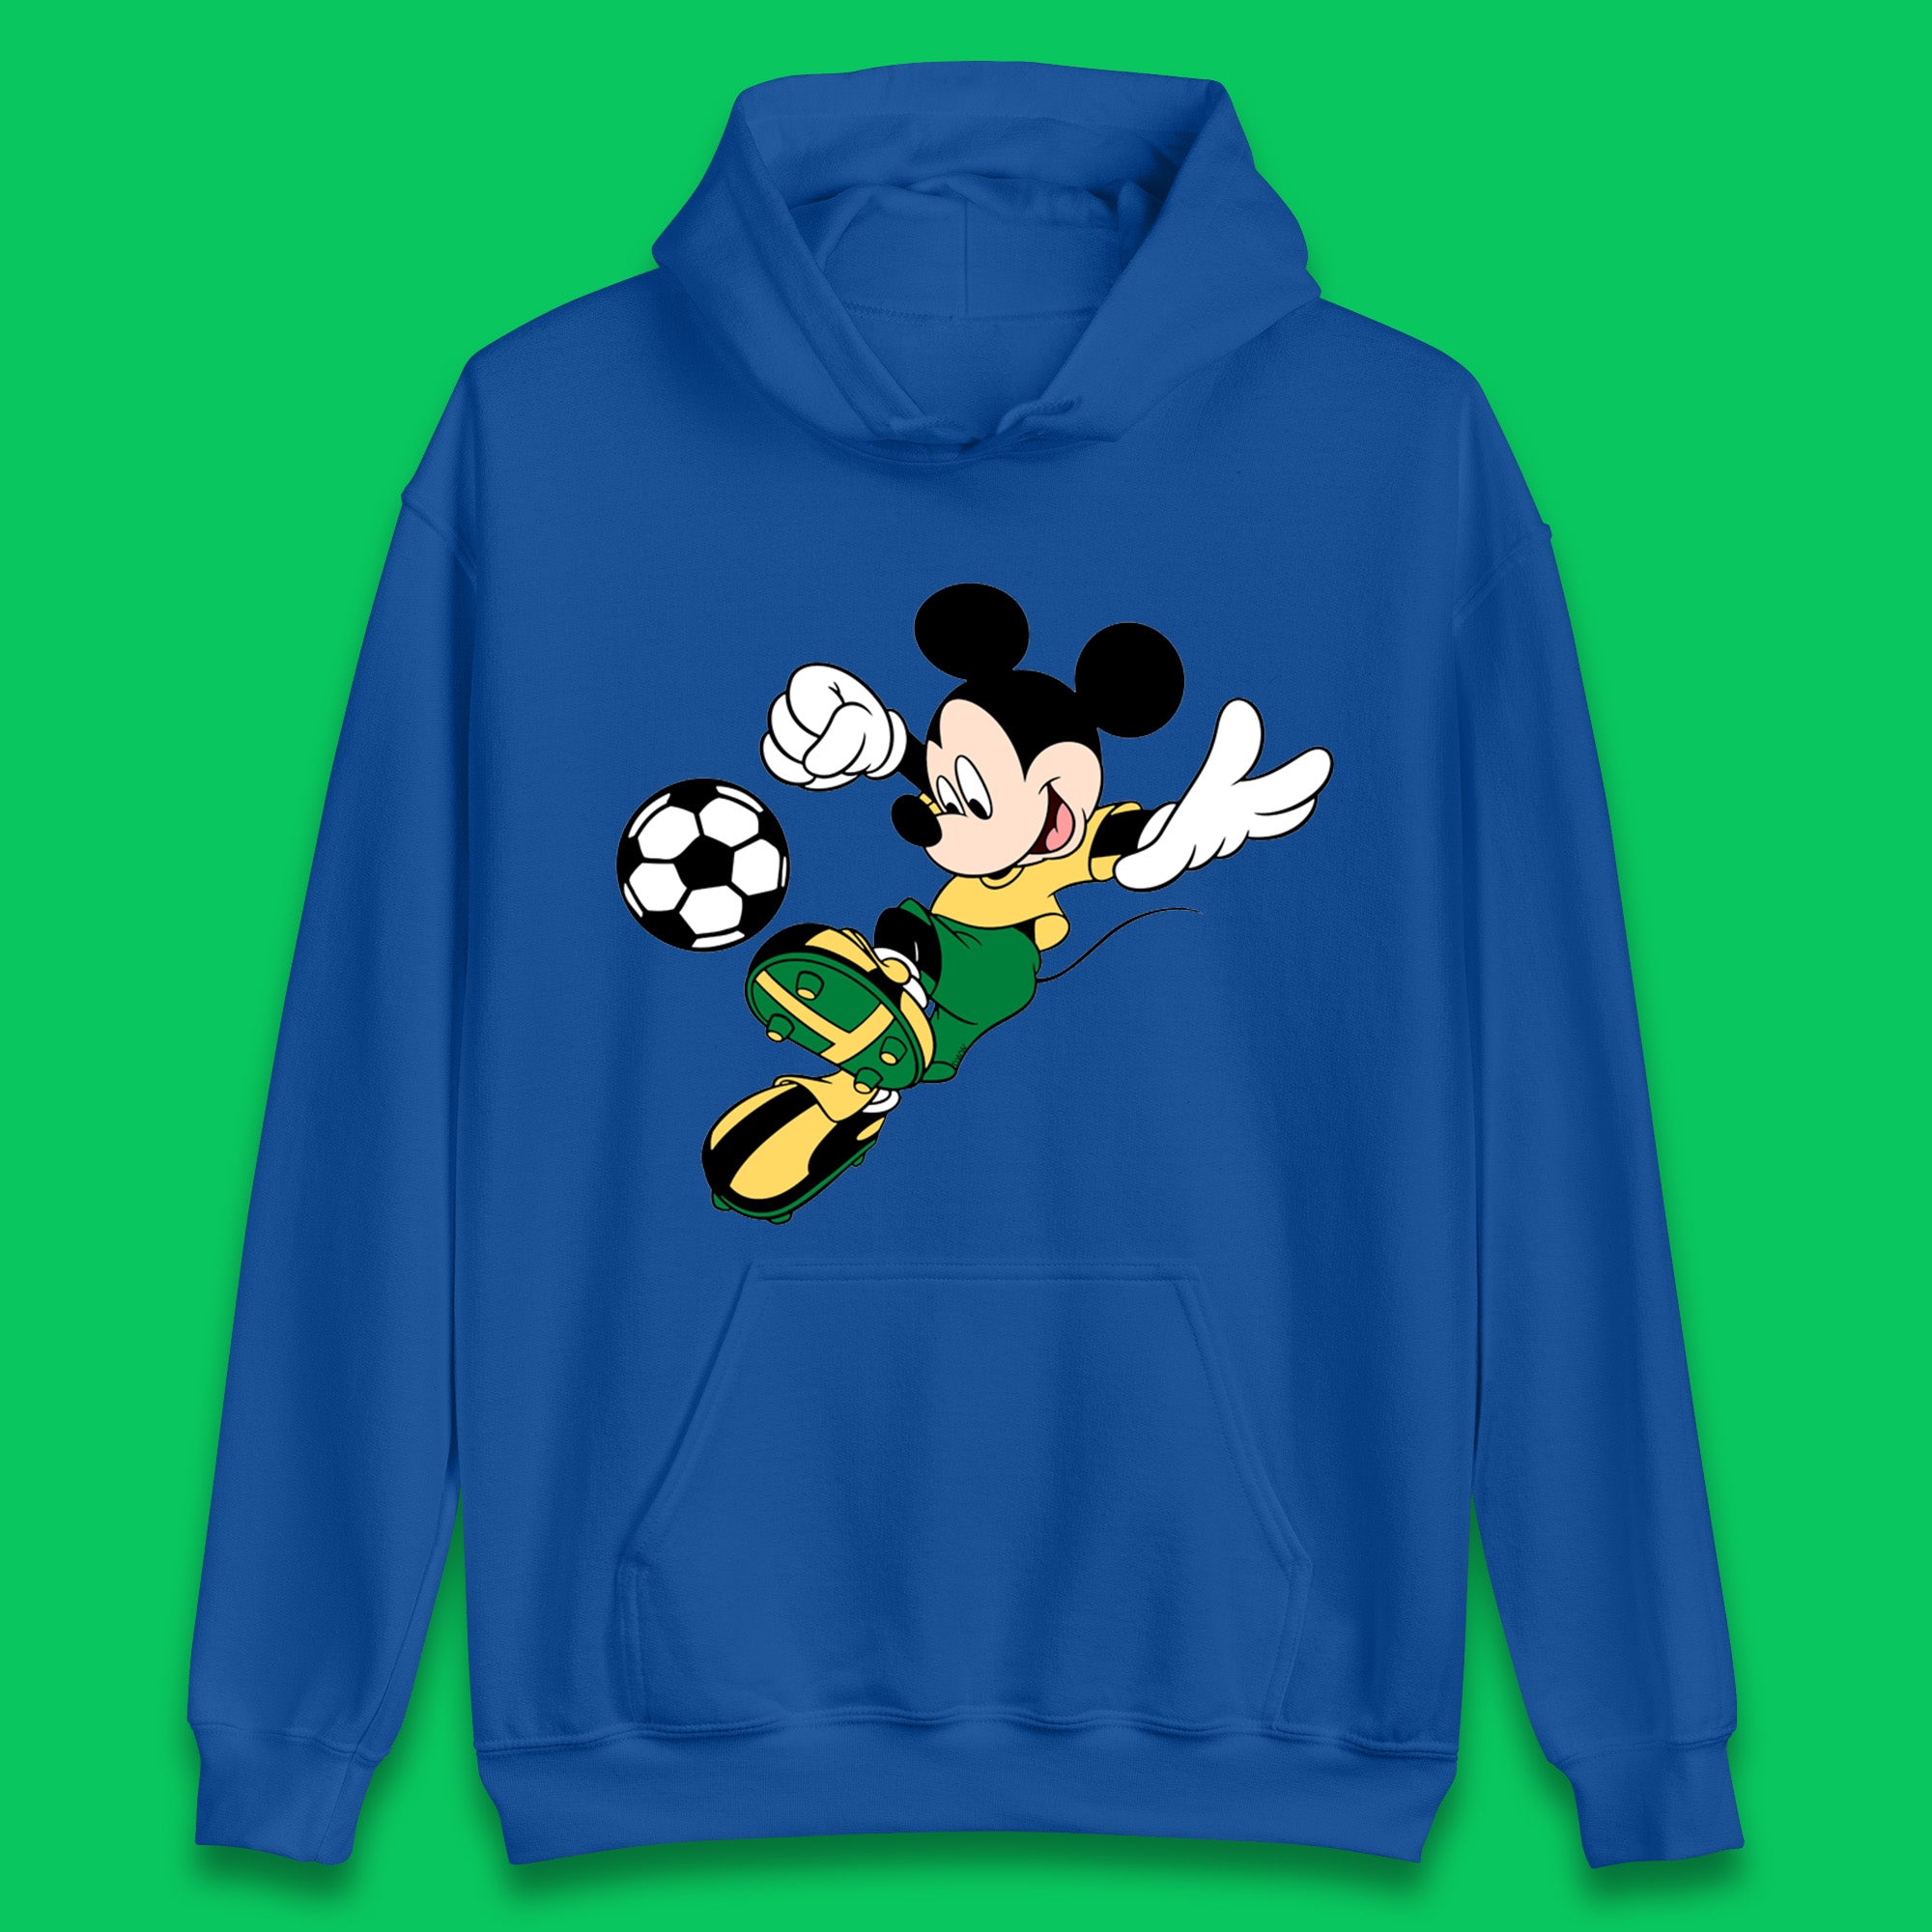 Mickey Mouse Kicking Football Soccer Player Disney Cartoon Mickey Soccer Player Football Team Unisex Hoodie